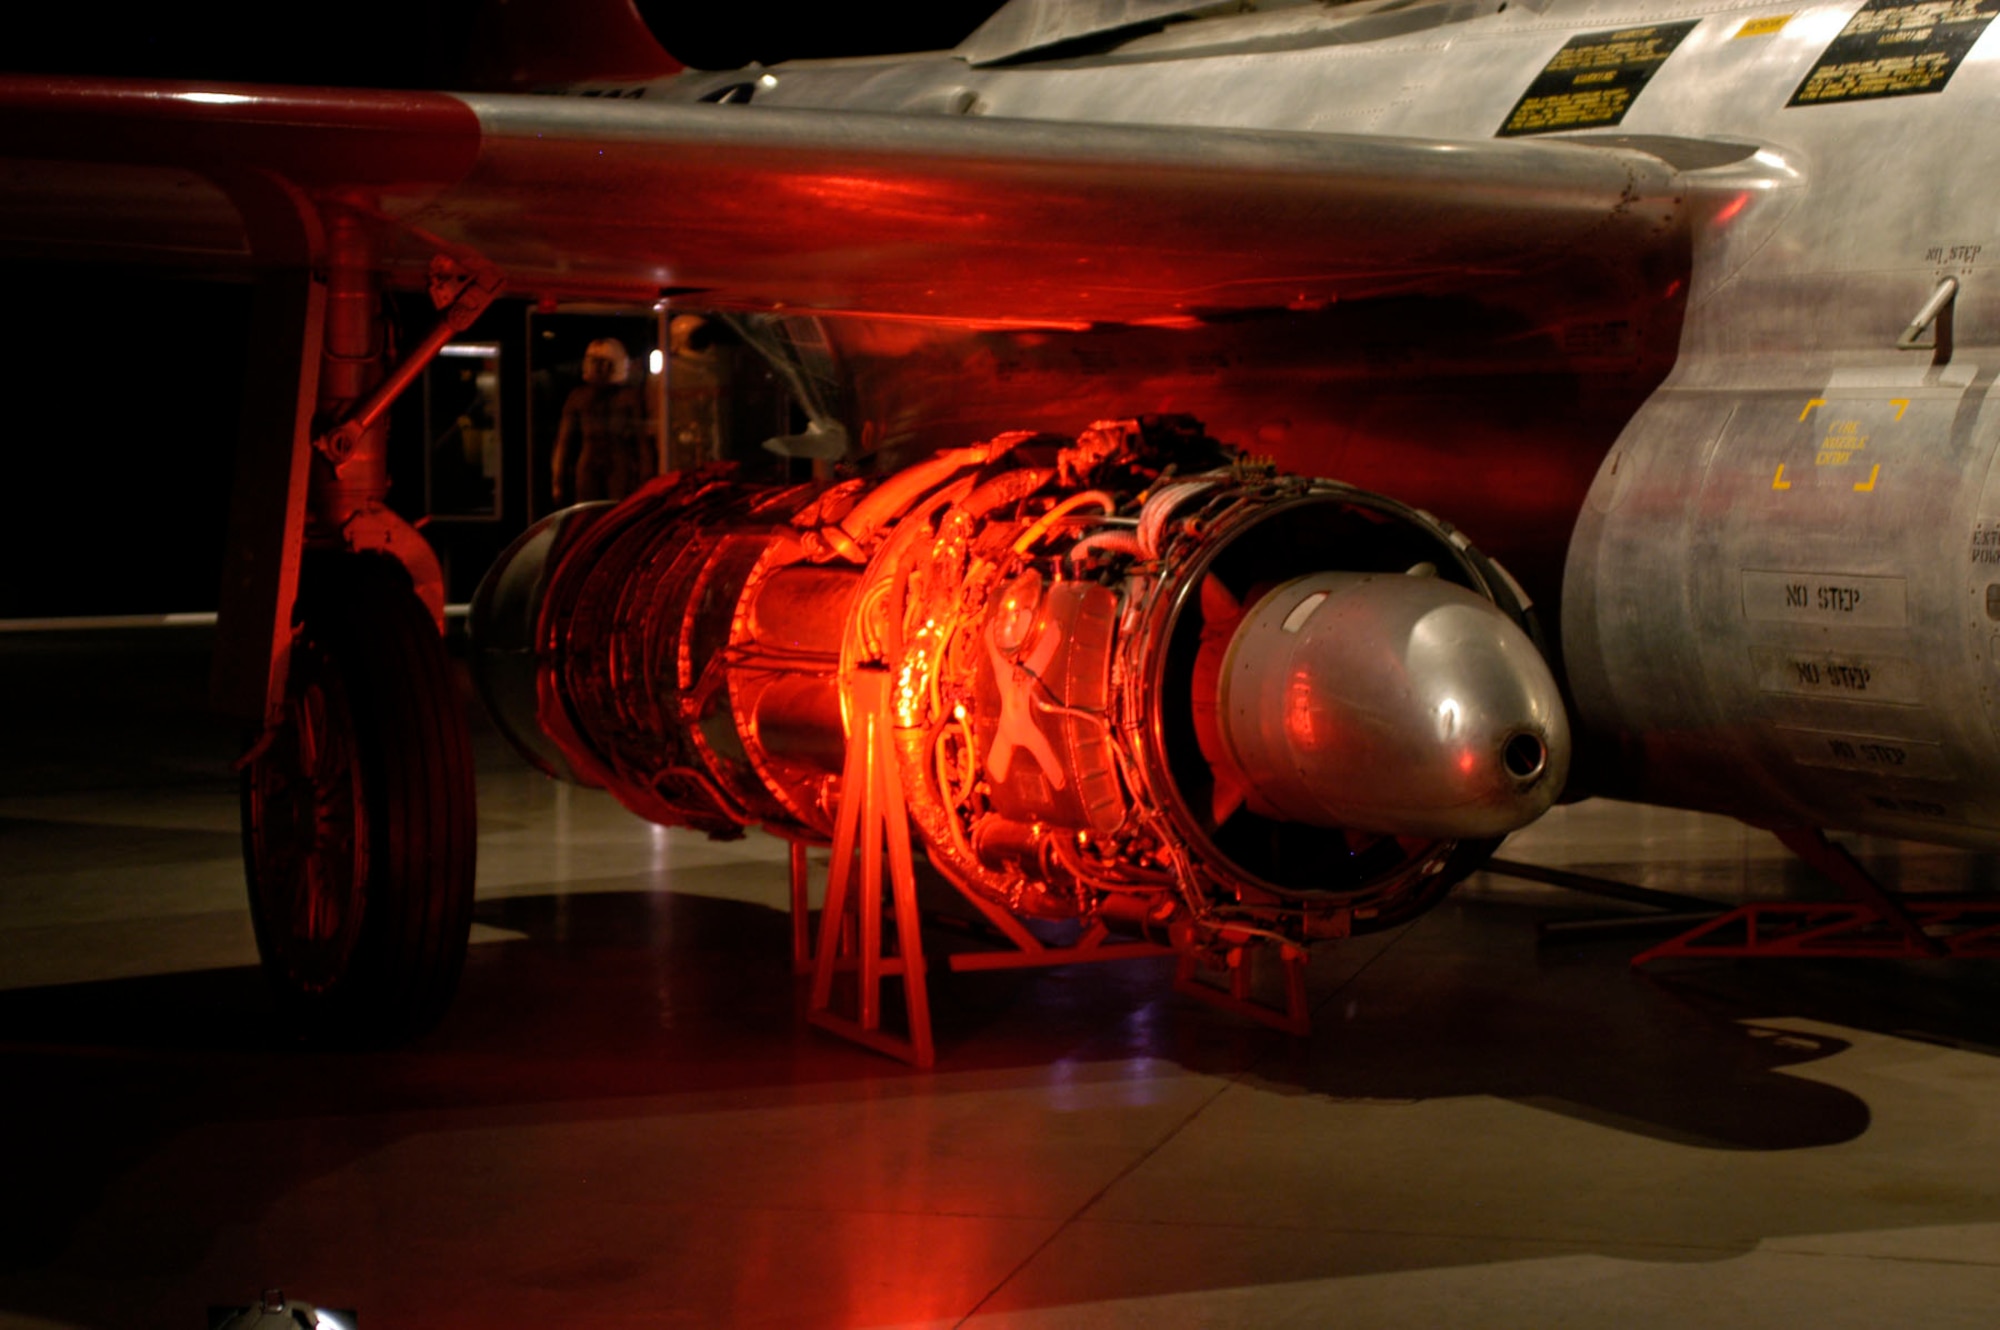 DAYTON, Ohio - The Allison J35-A-35A Turbojet engine on display beneath the F-89J in the Cold War Gallery at the National Museum of the U.S. Air Force. (U.S. Air Force photo)